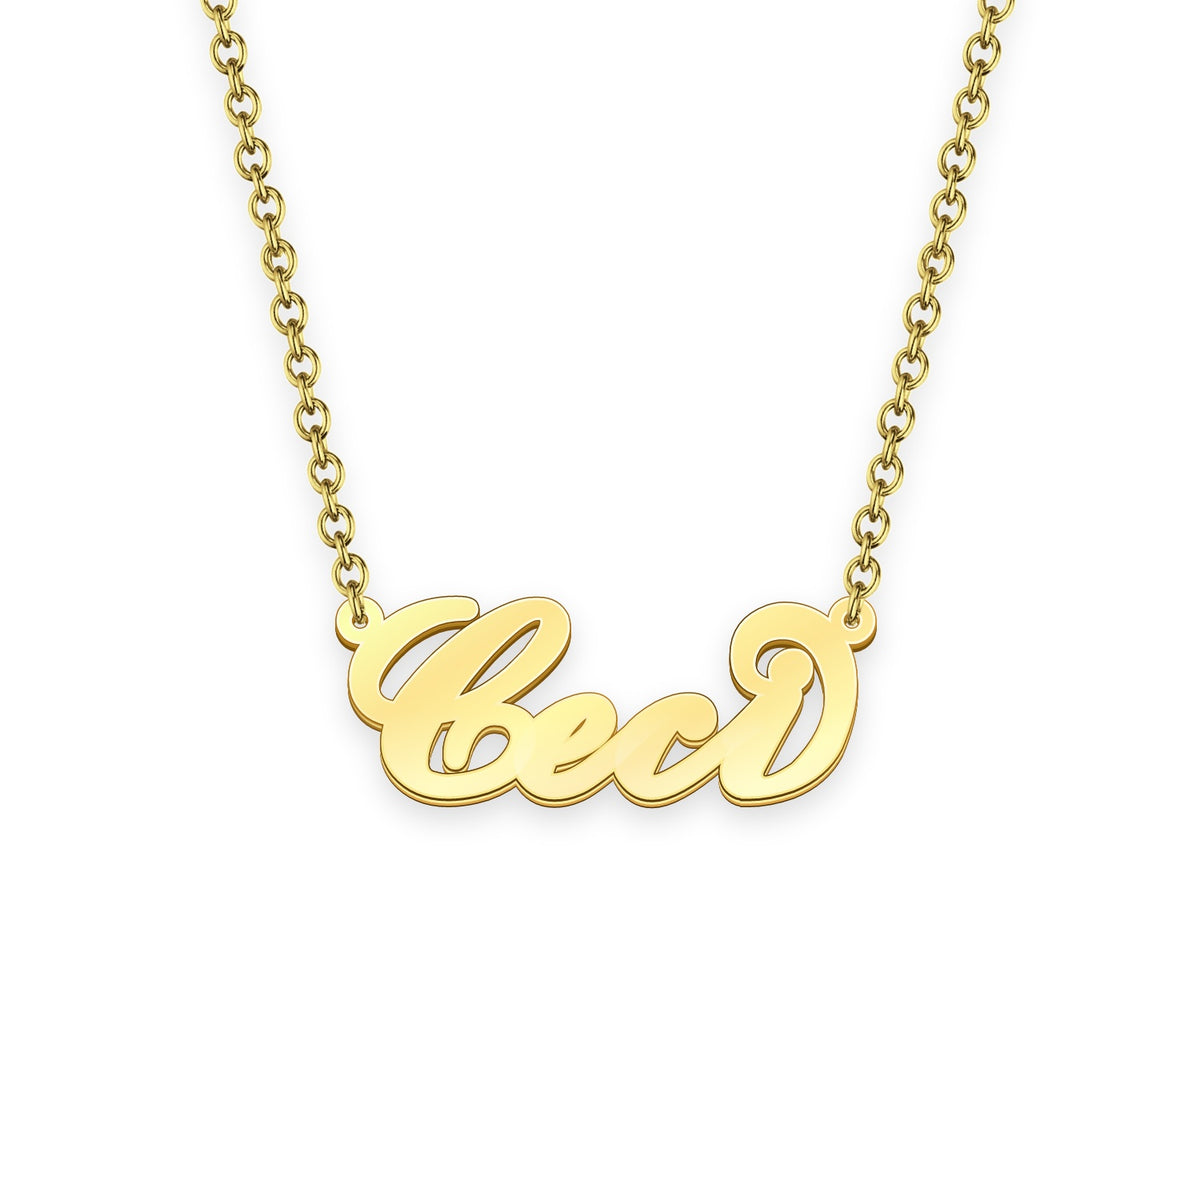 Ceci name necklace Gold Custom Necklace, Personalized Gifts For Her ...